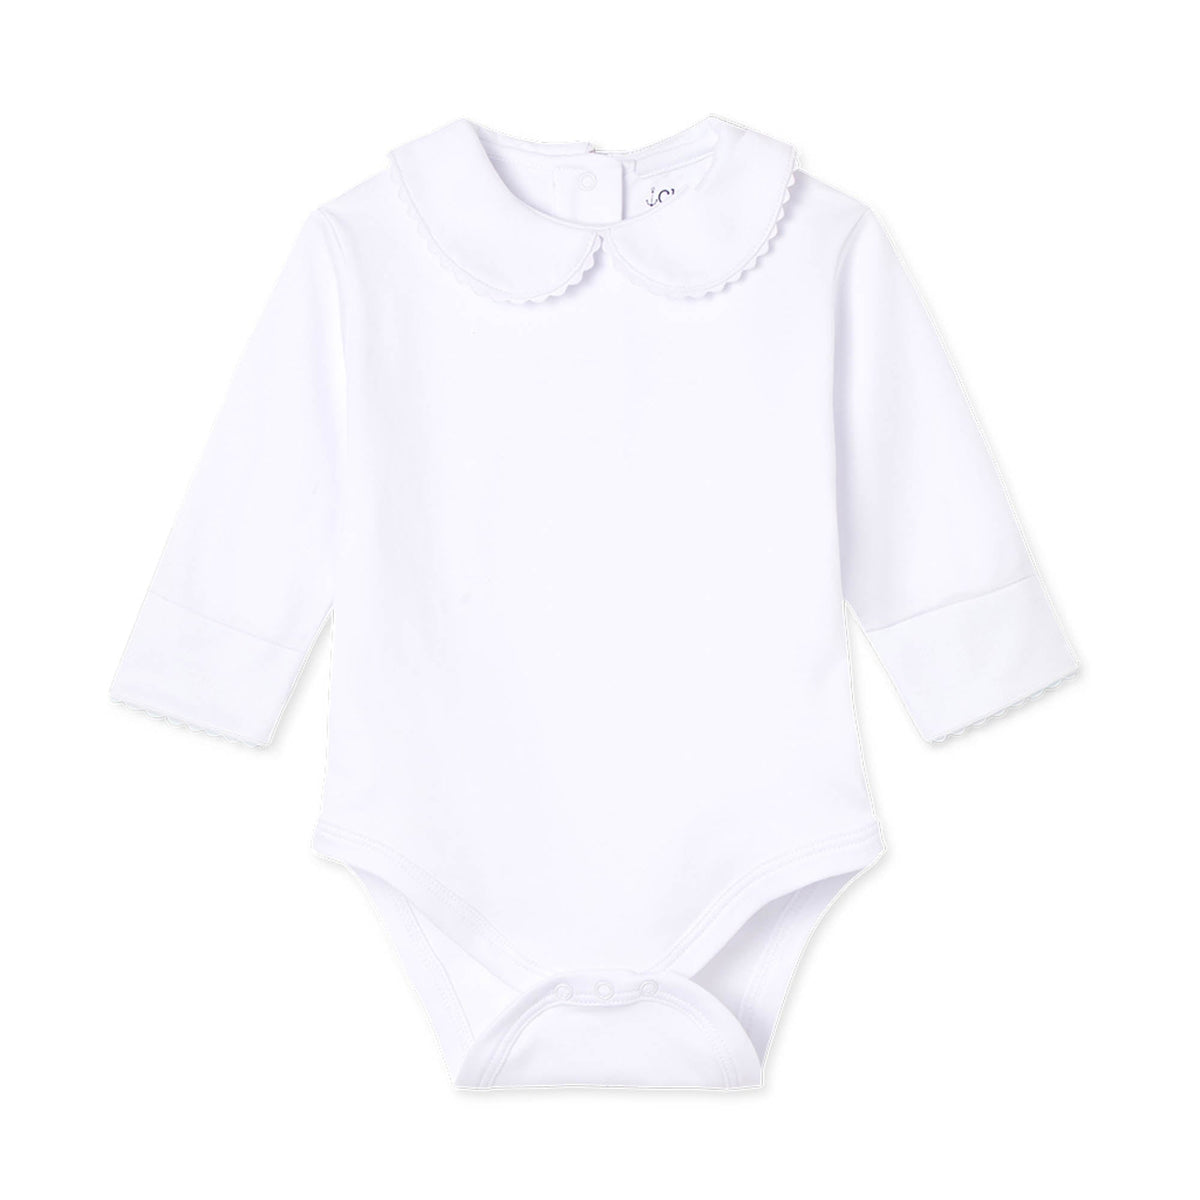 Classic and Preppy Izzy Long Sleeve Onesie, White with White Ric Rac-Baby Rompers-Bright White with Bright White Ric Rac-0-3M-CPC - Classic Prep Childrenswear